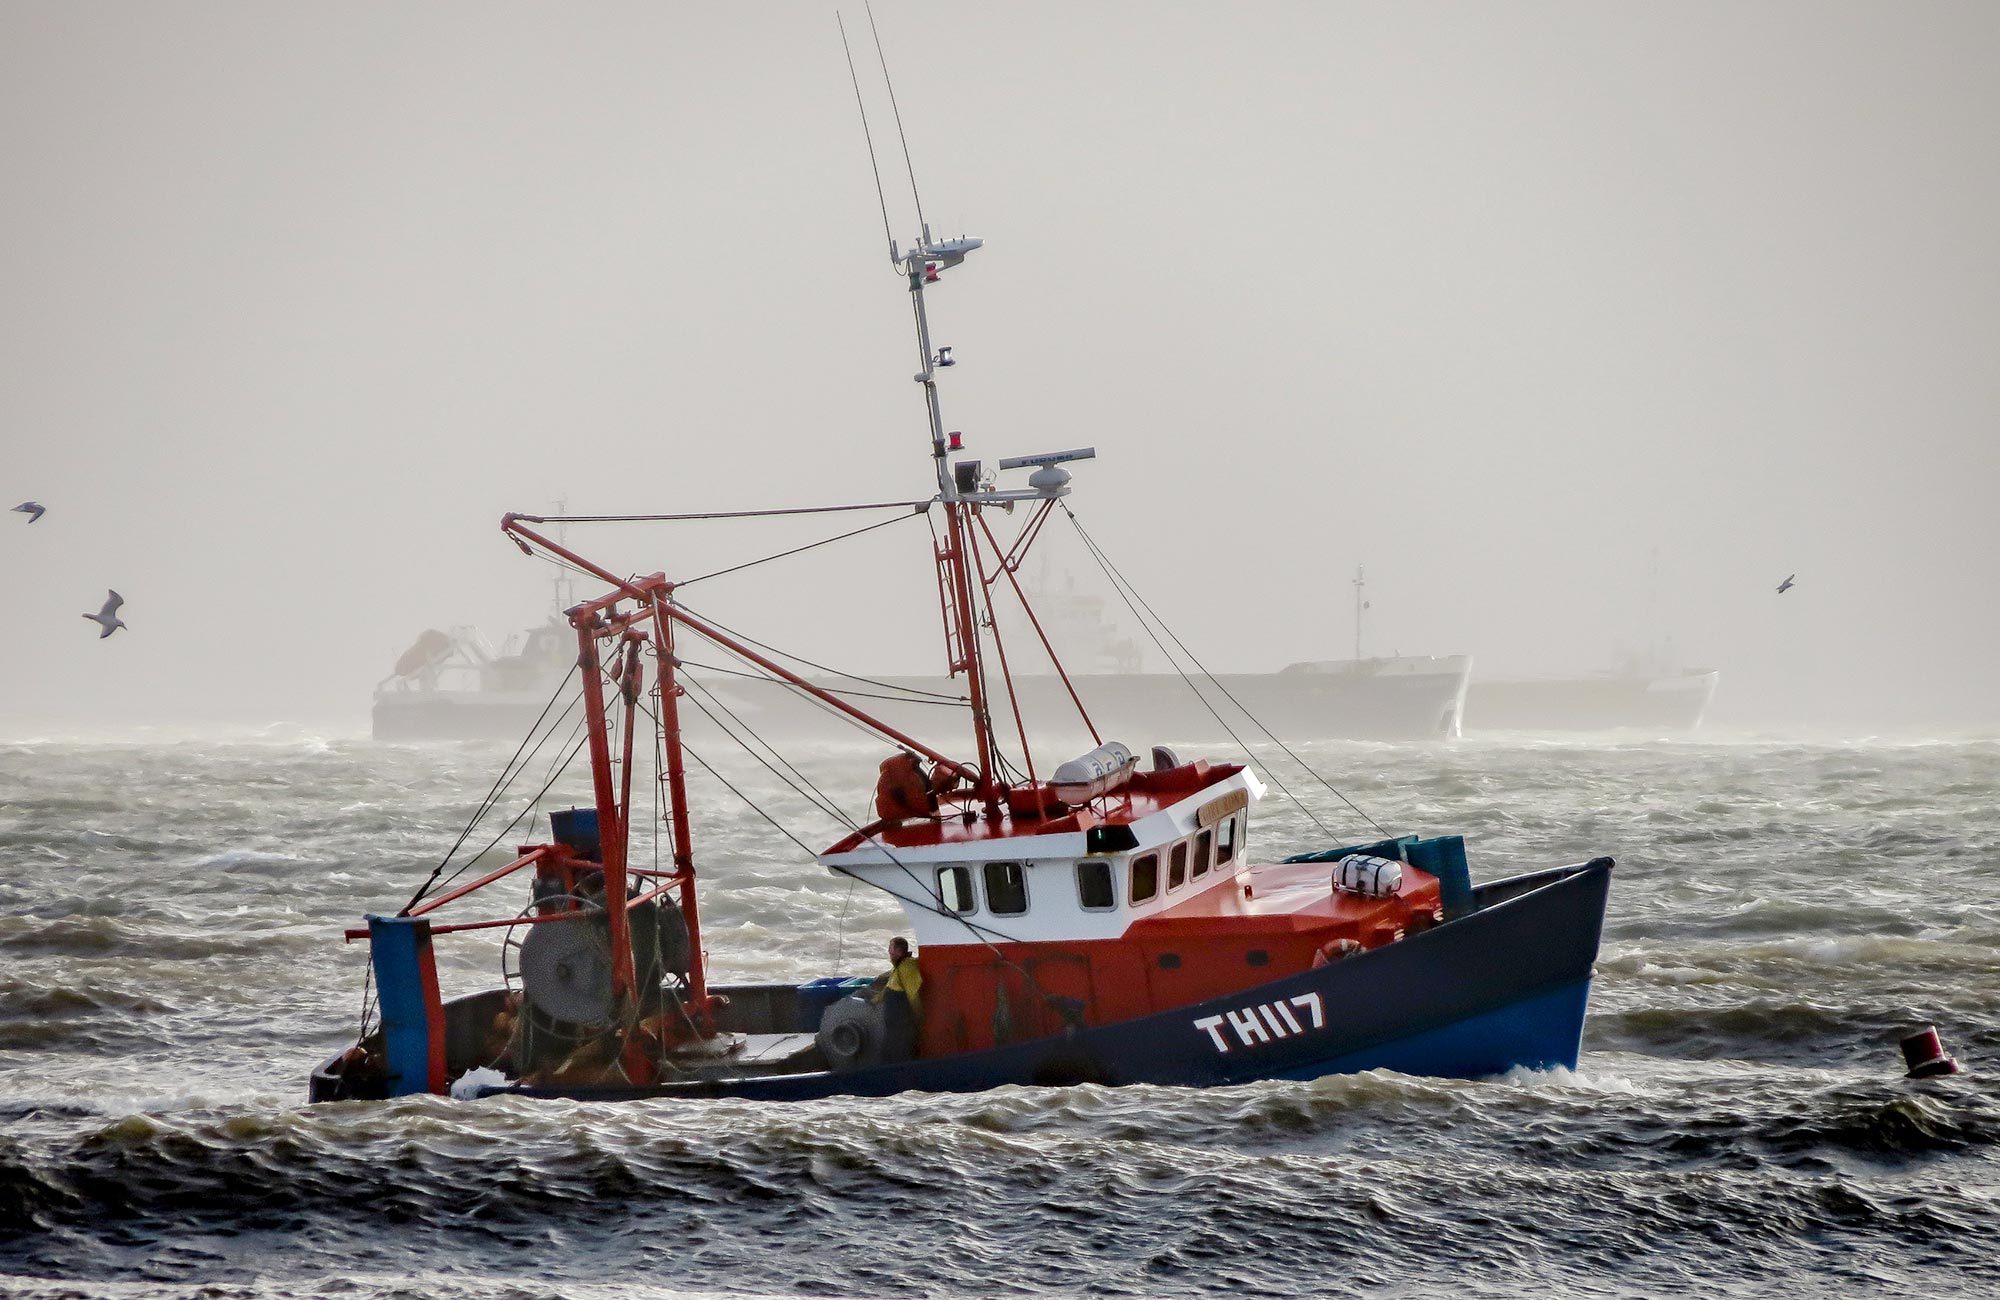 Fishing boat out in rough seas